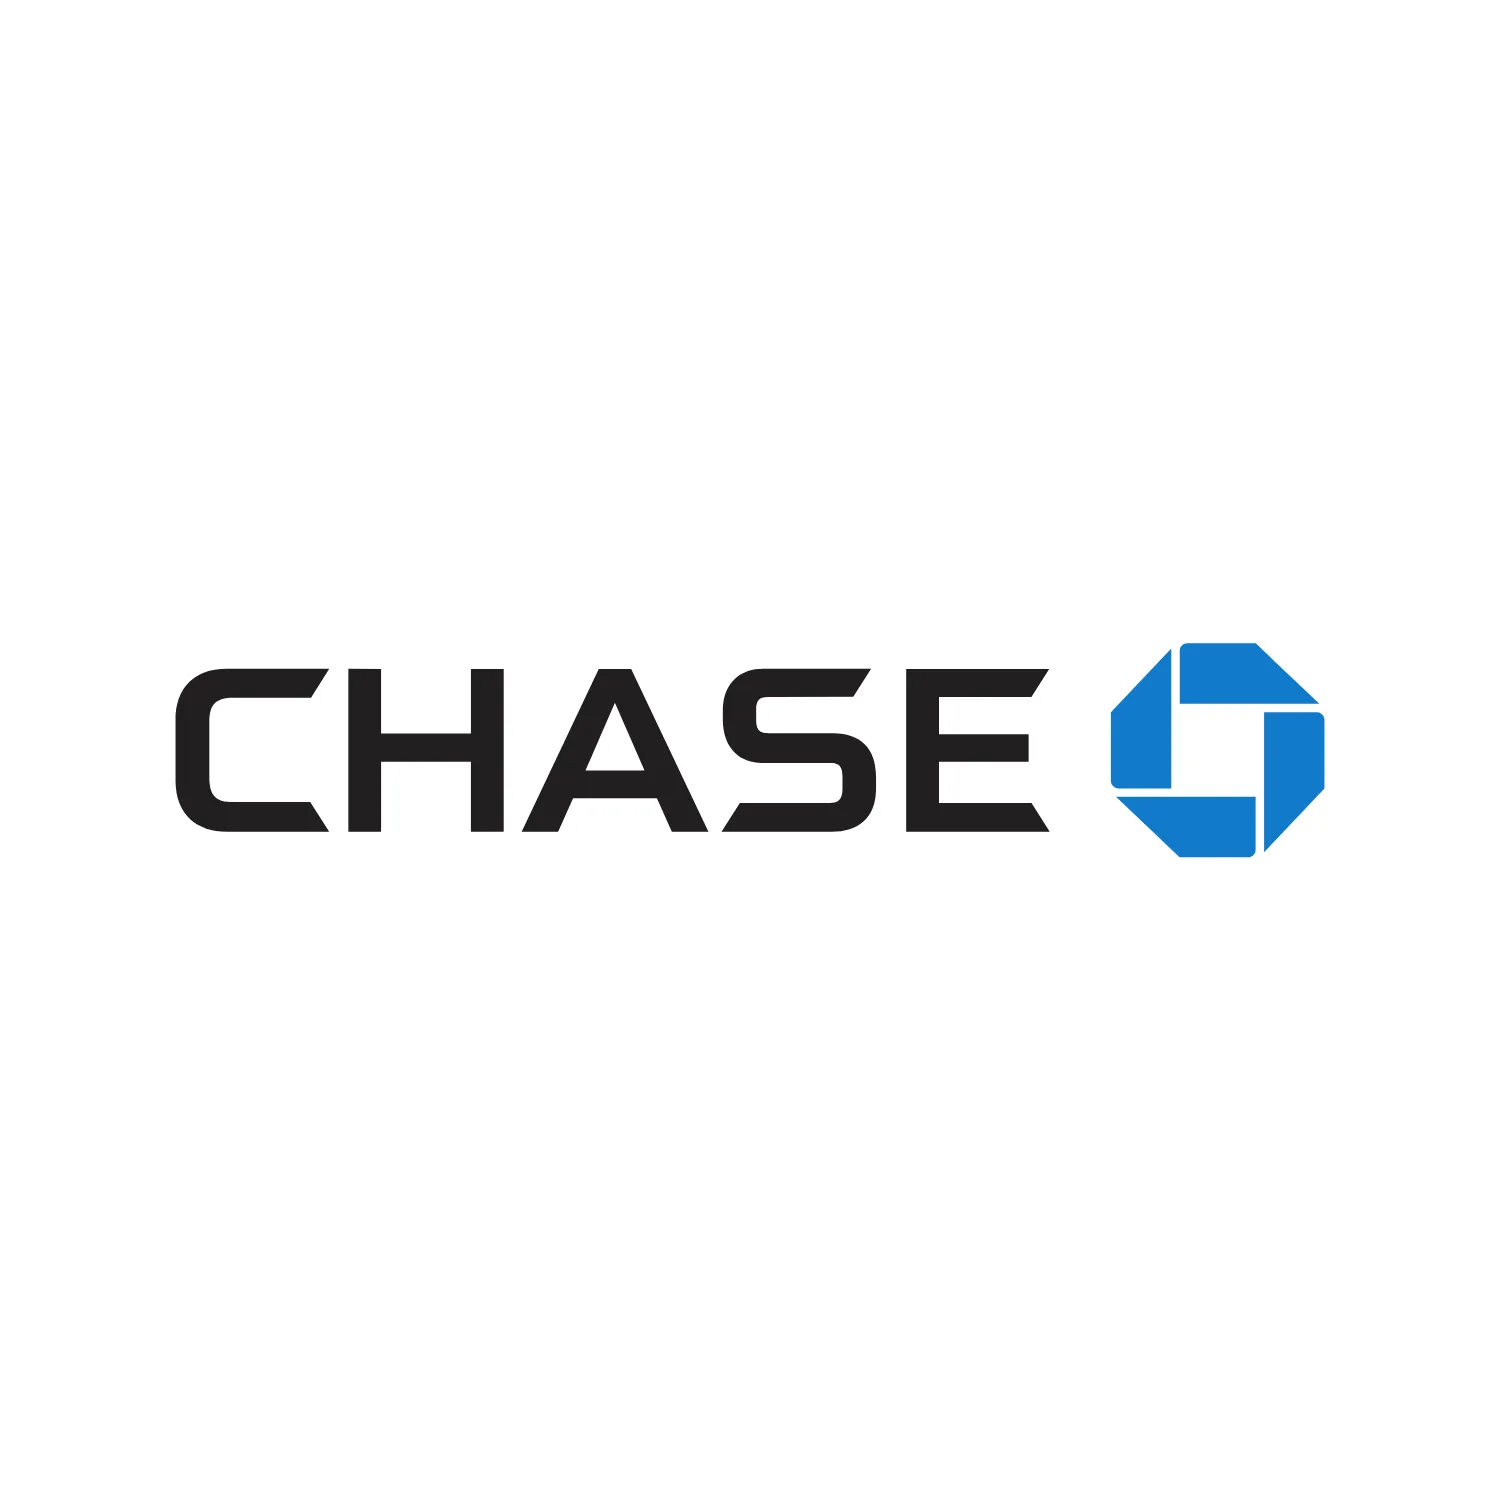 Database of Chase Bank Branch Locations in the United States